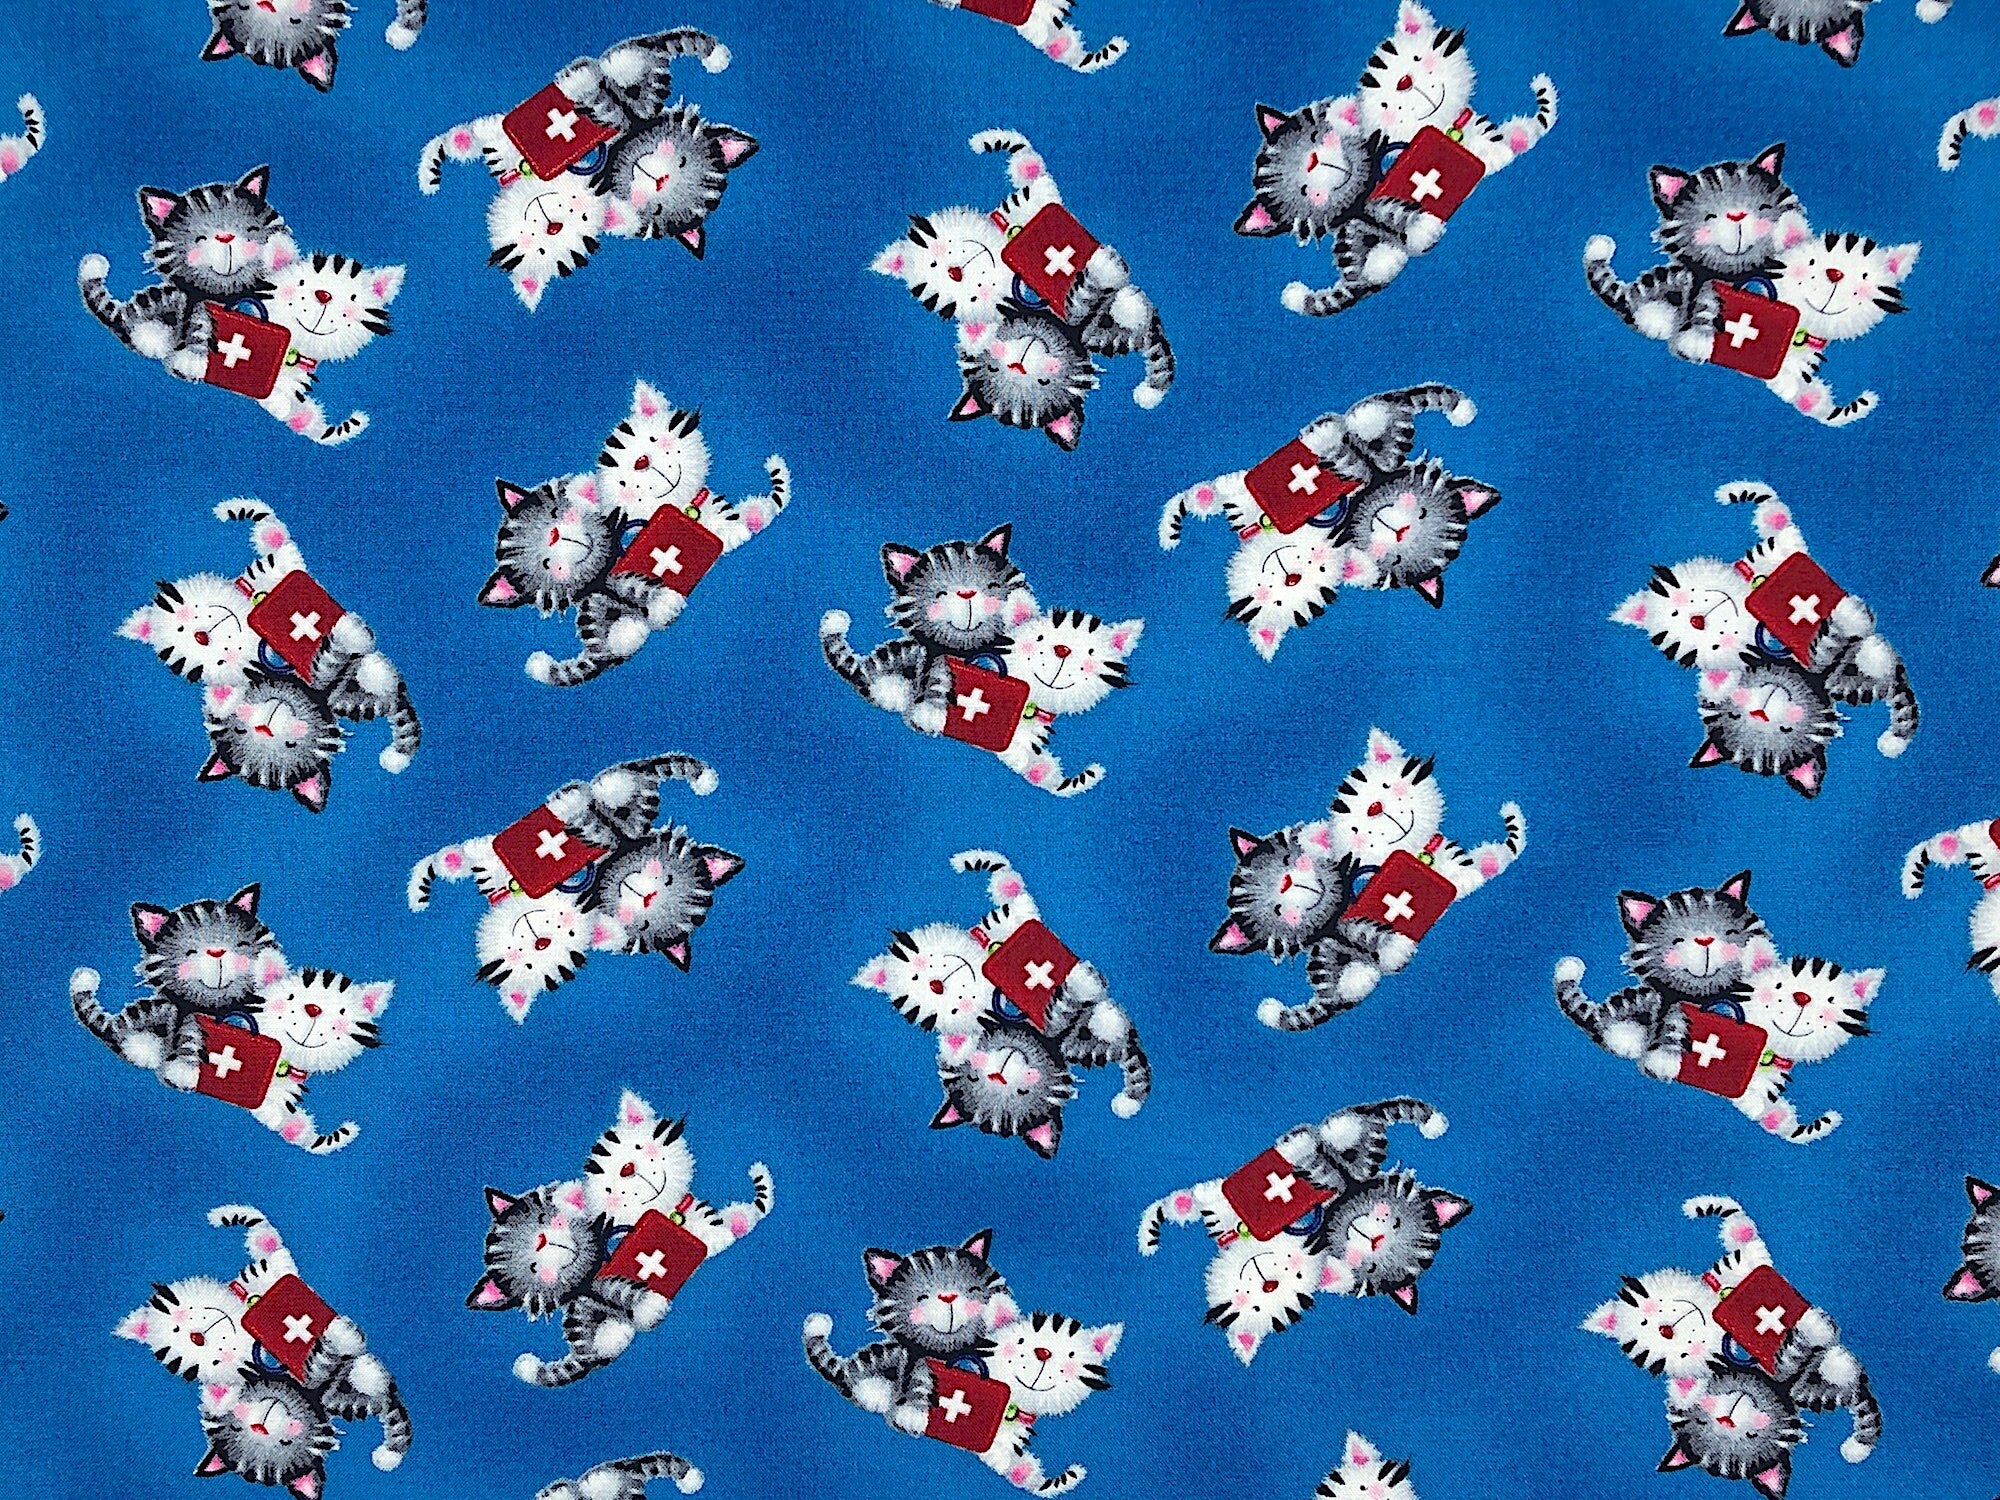 This fabric is part of the big hugs collection. The blue fabric is covered with grey and white cats. There is a first aid kit sitting in front of the cats.